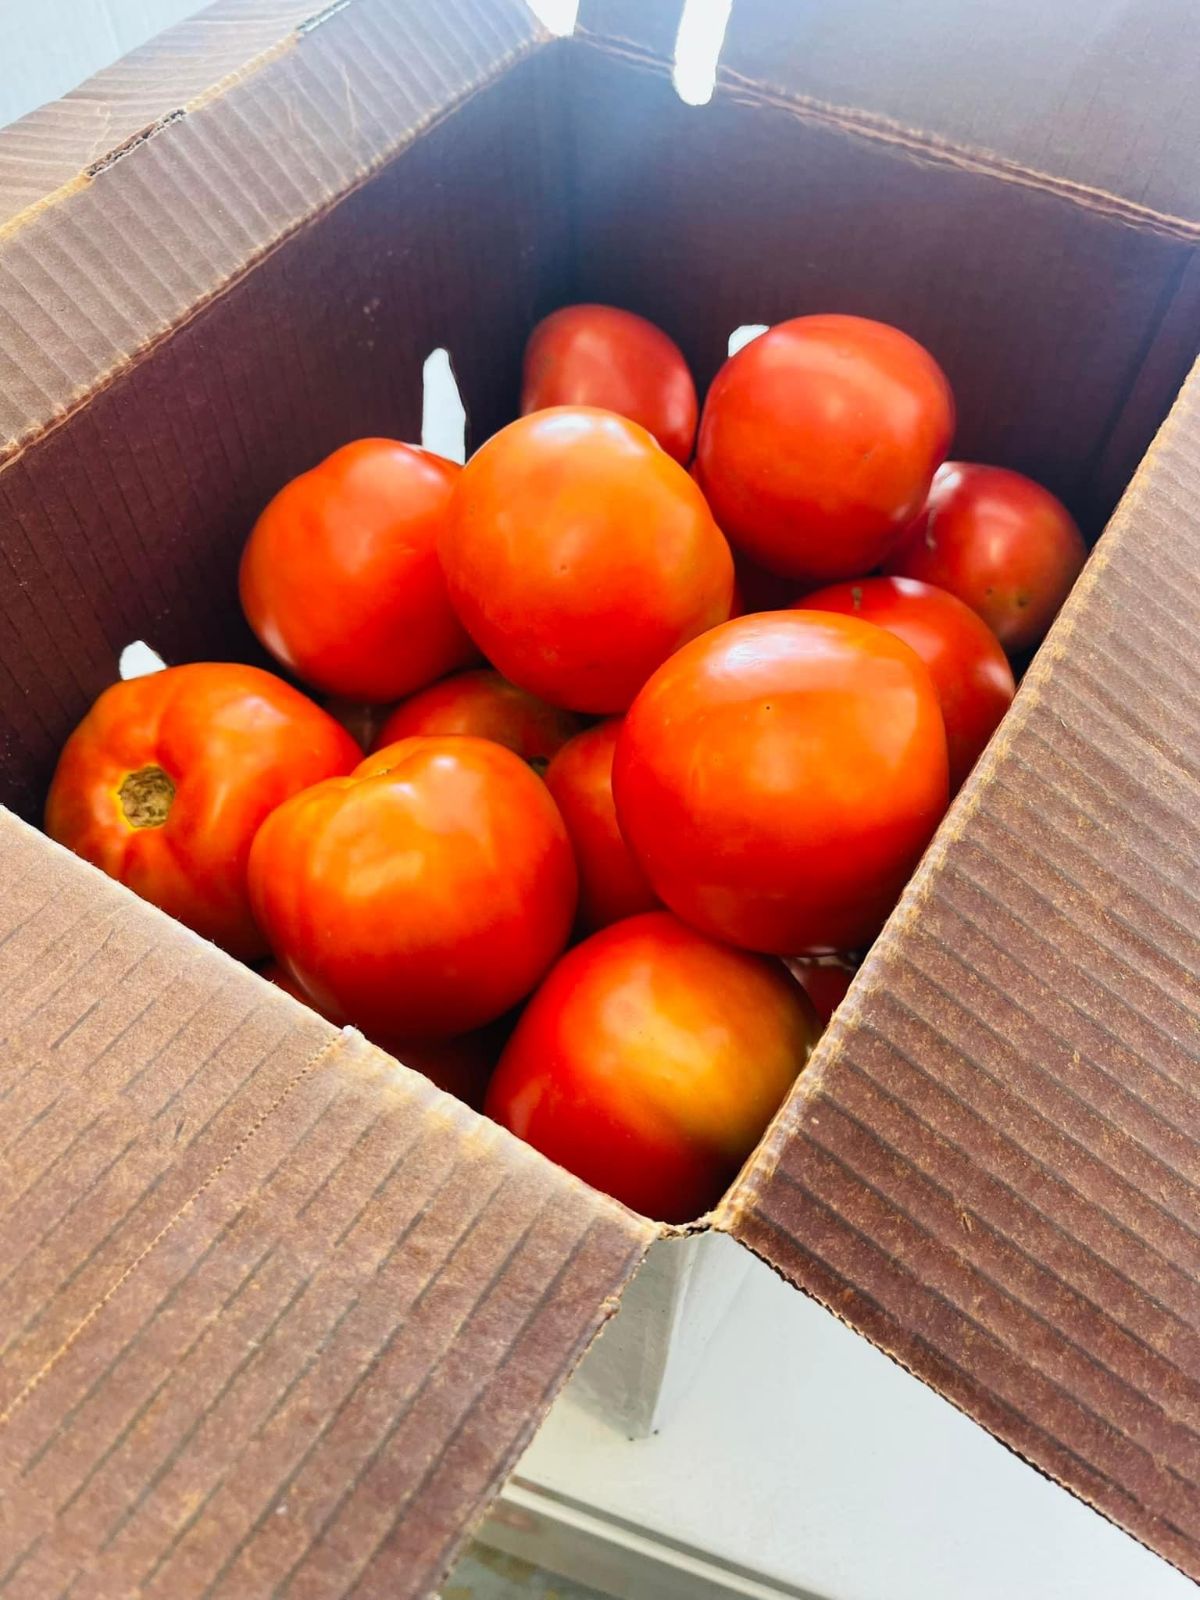 Ripening tomatoes in a box